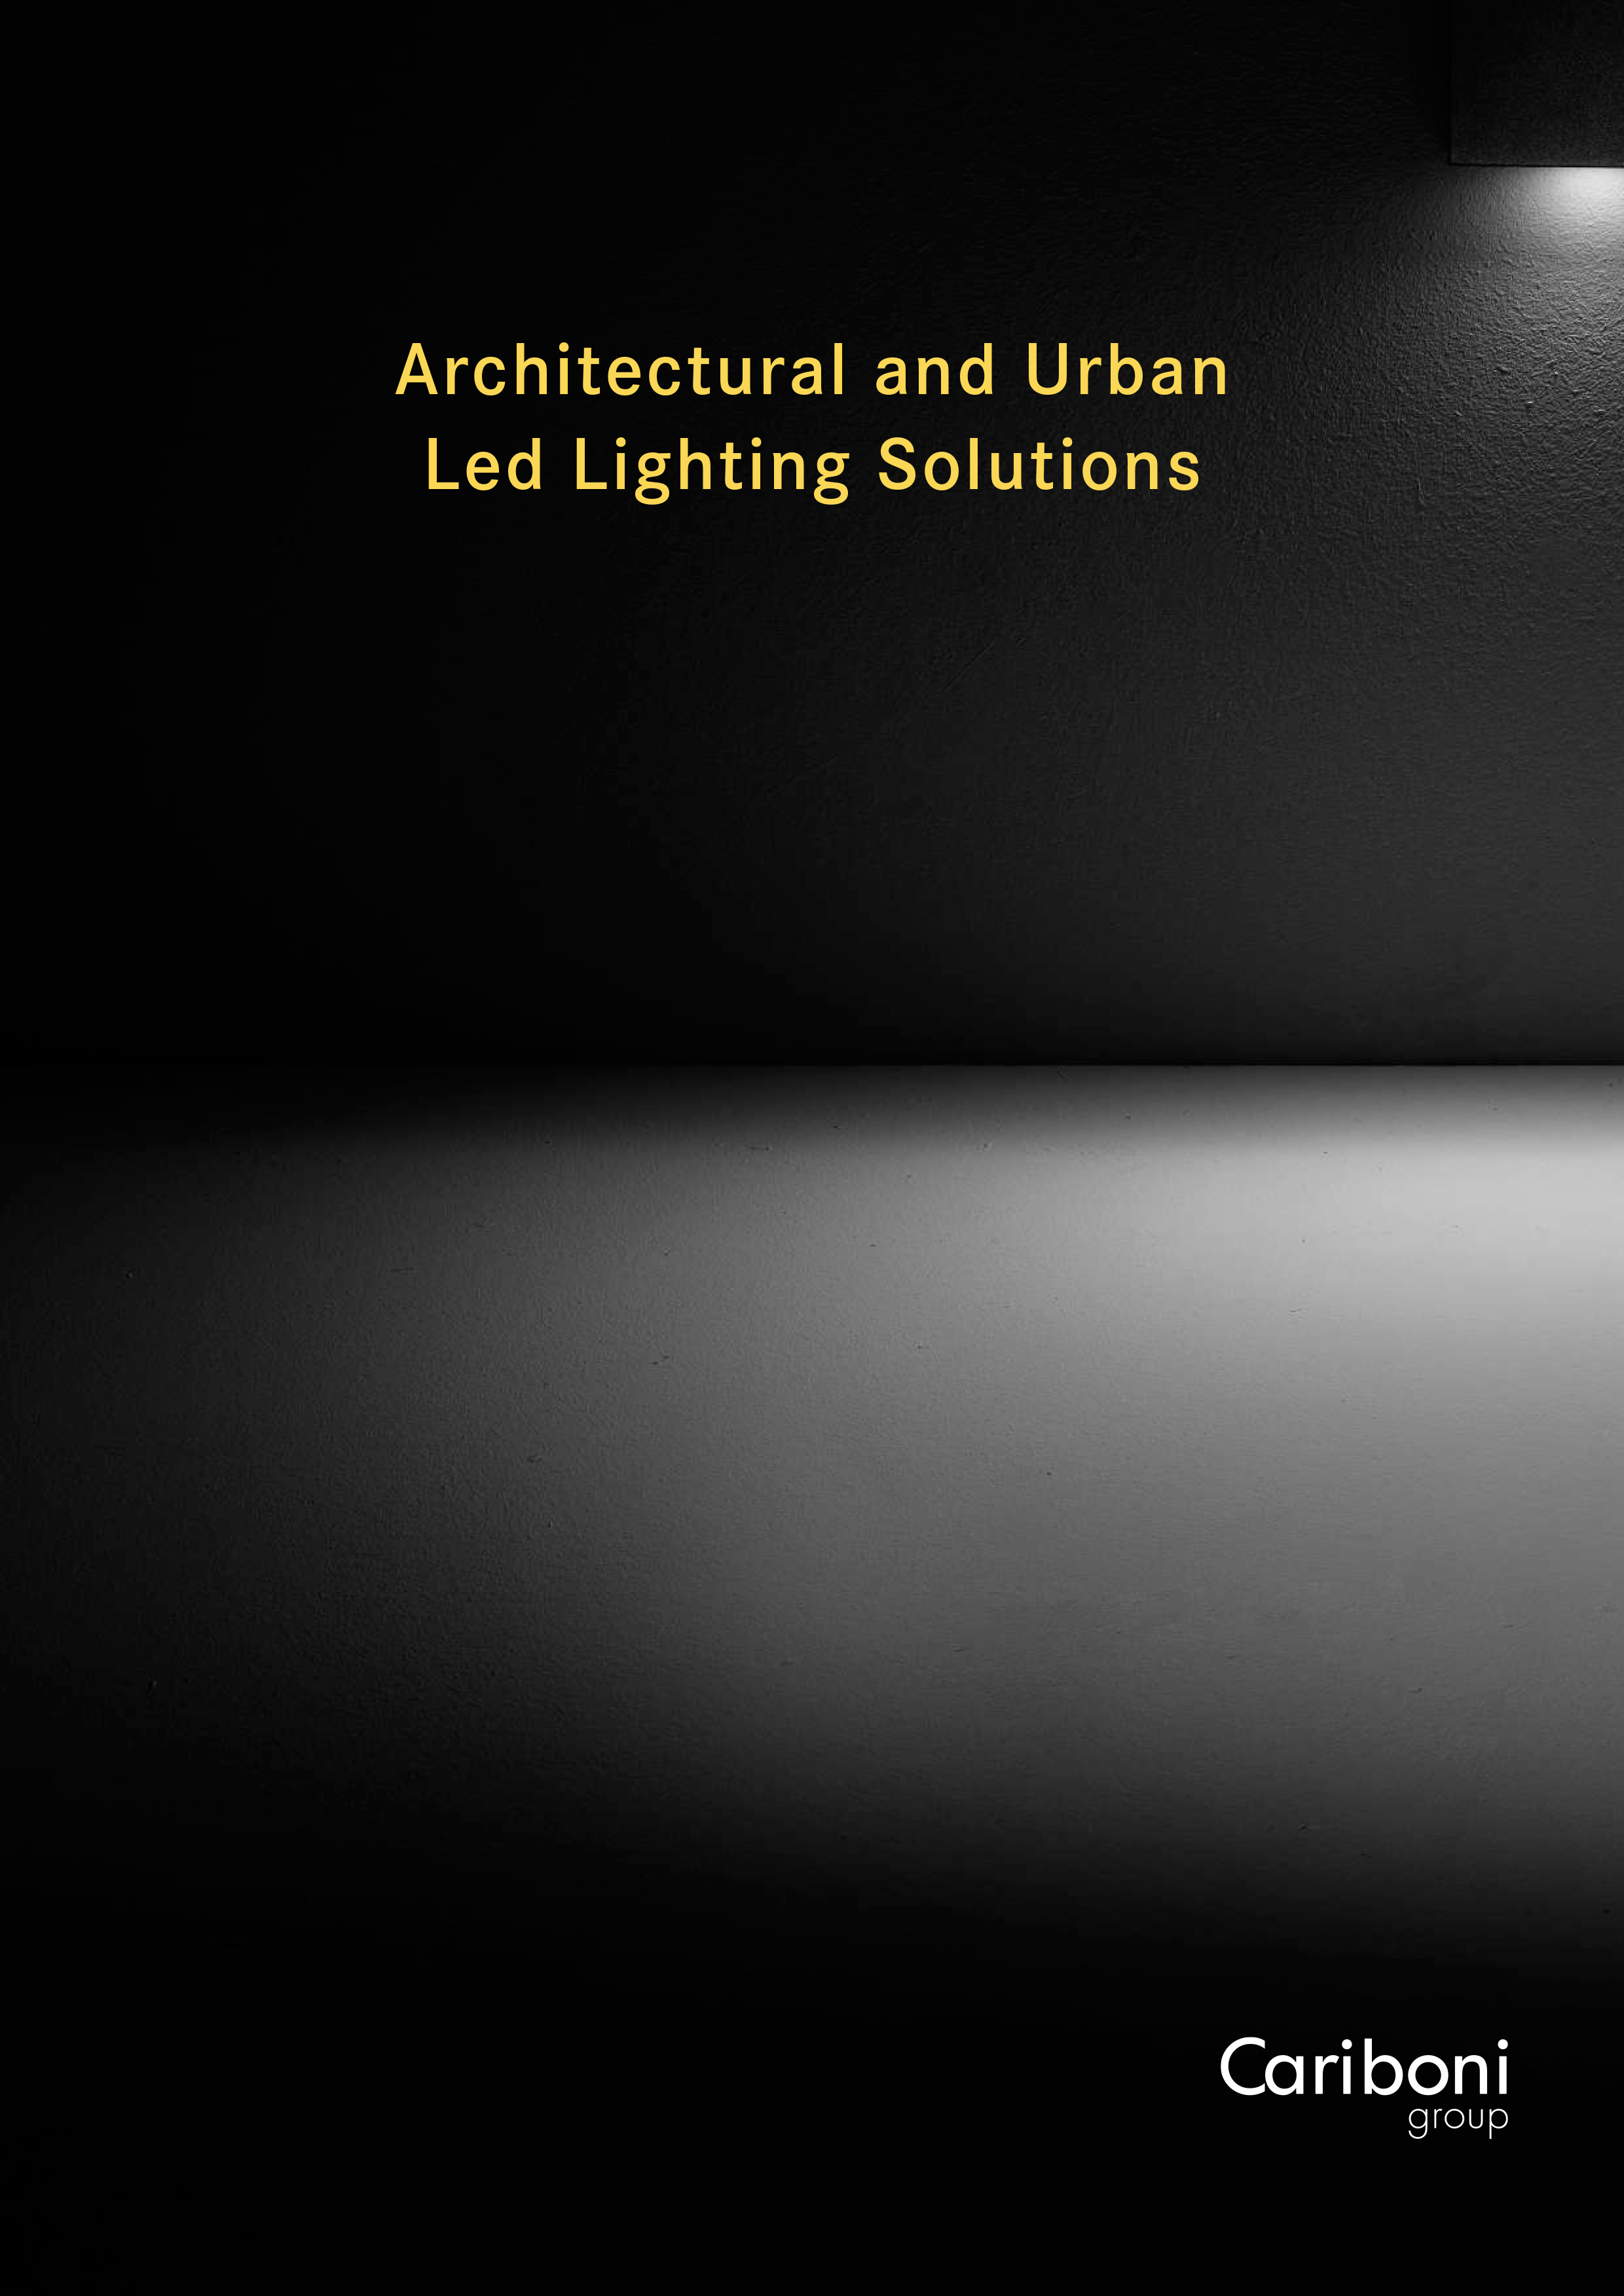 Architectural and Urban Led Lighting Solutions 2020